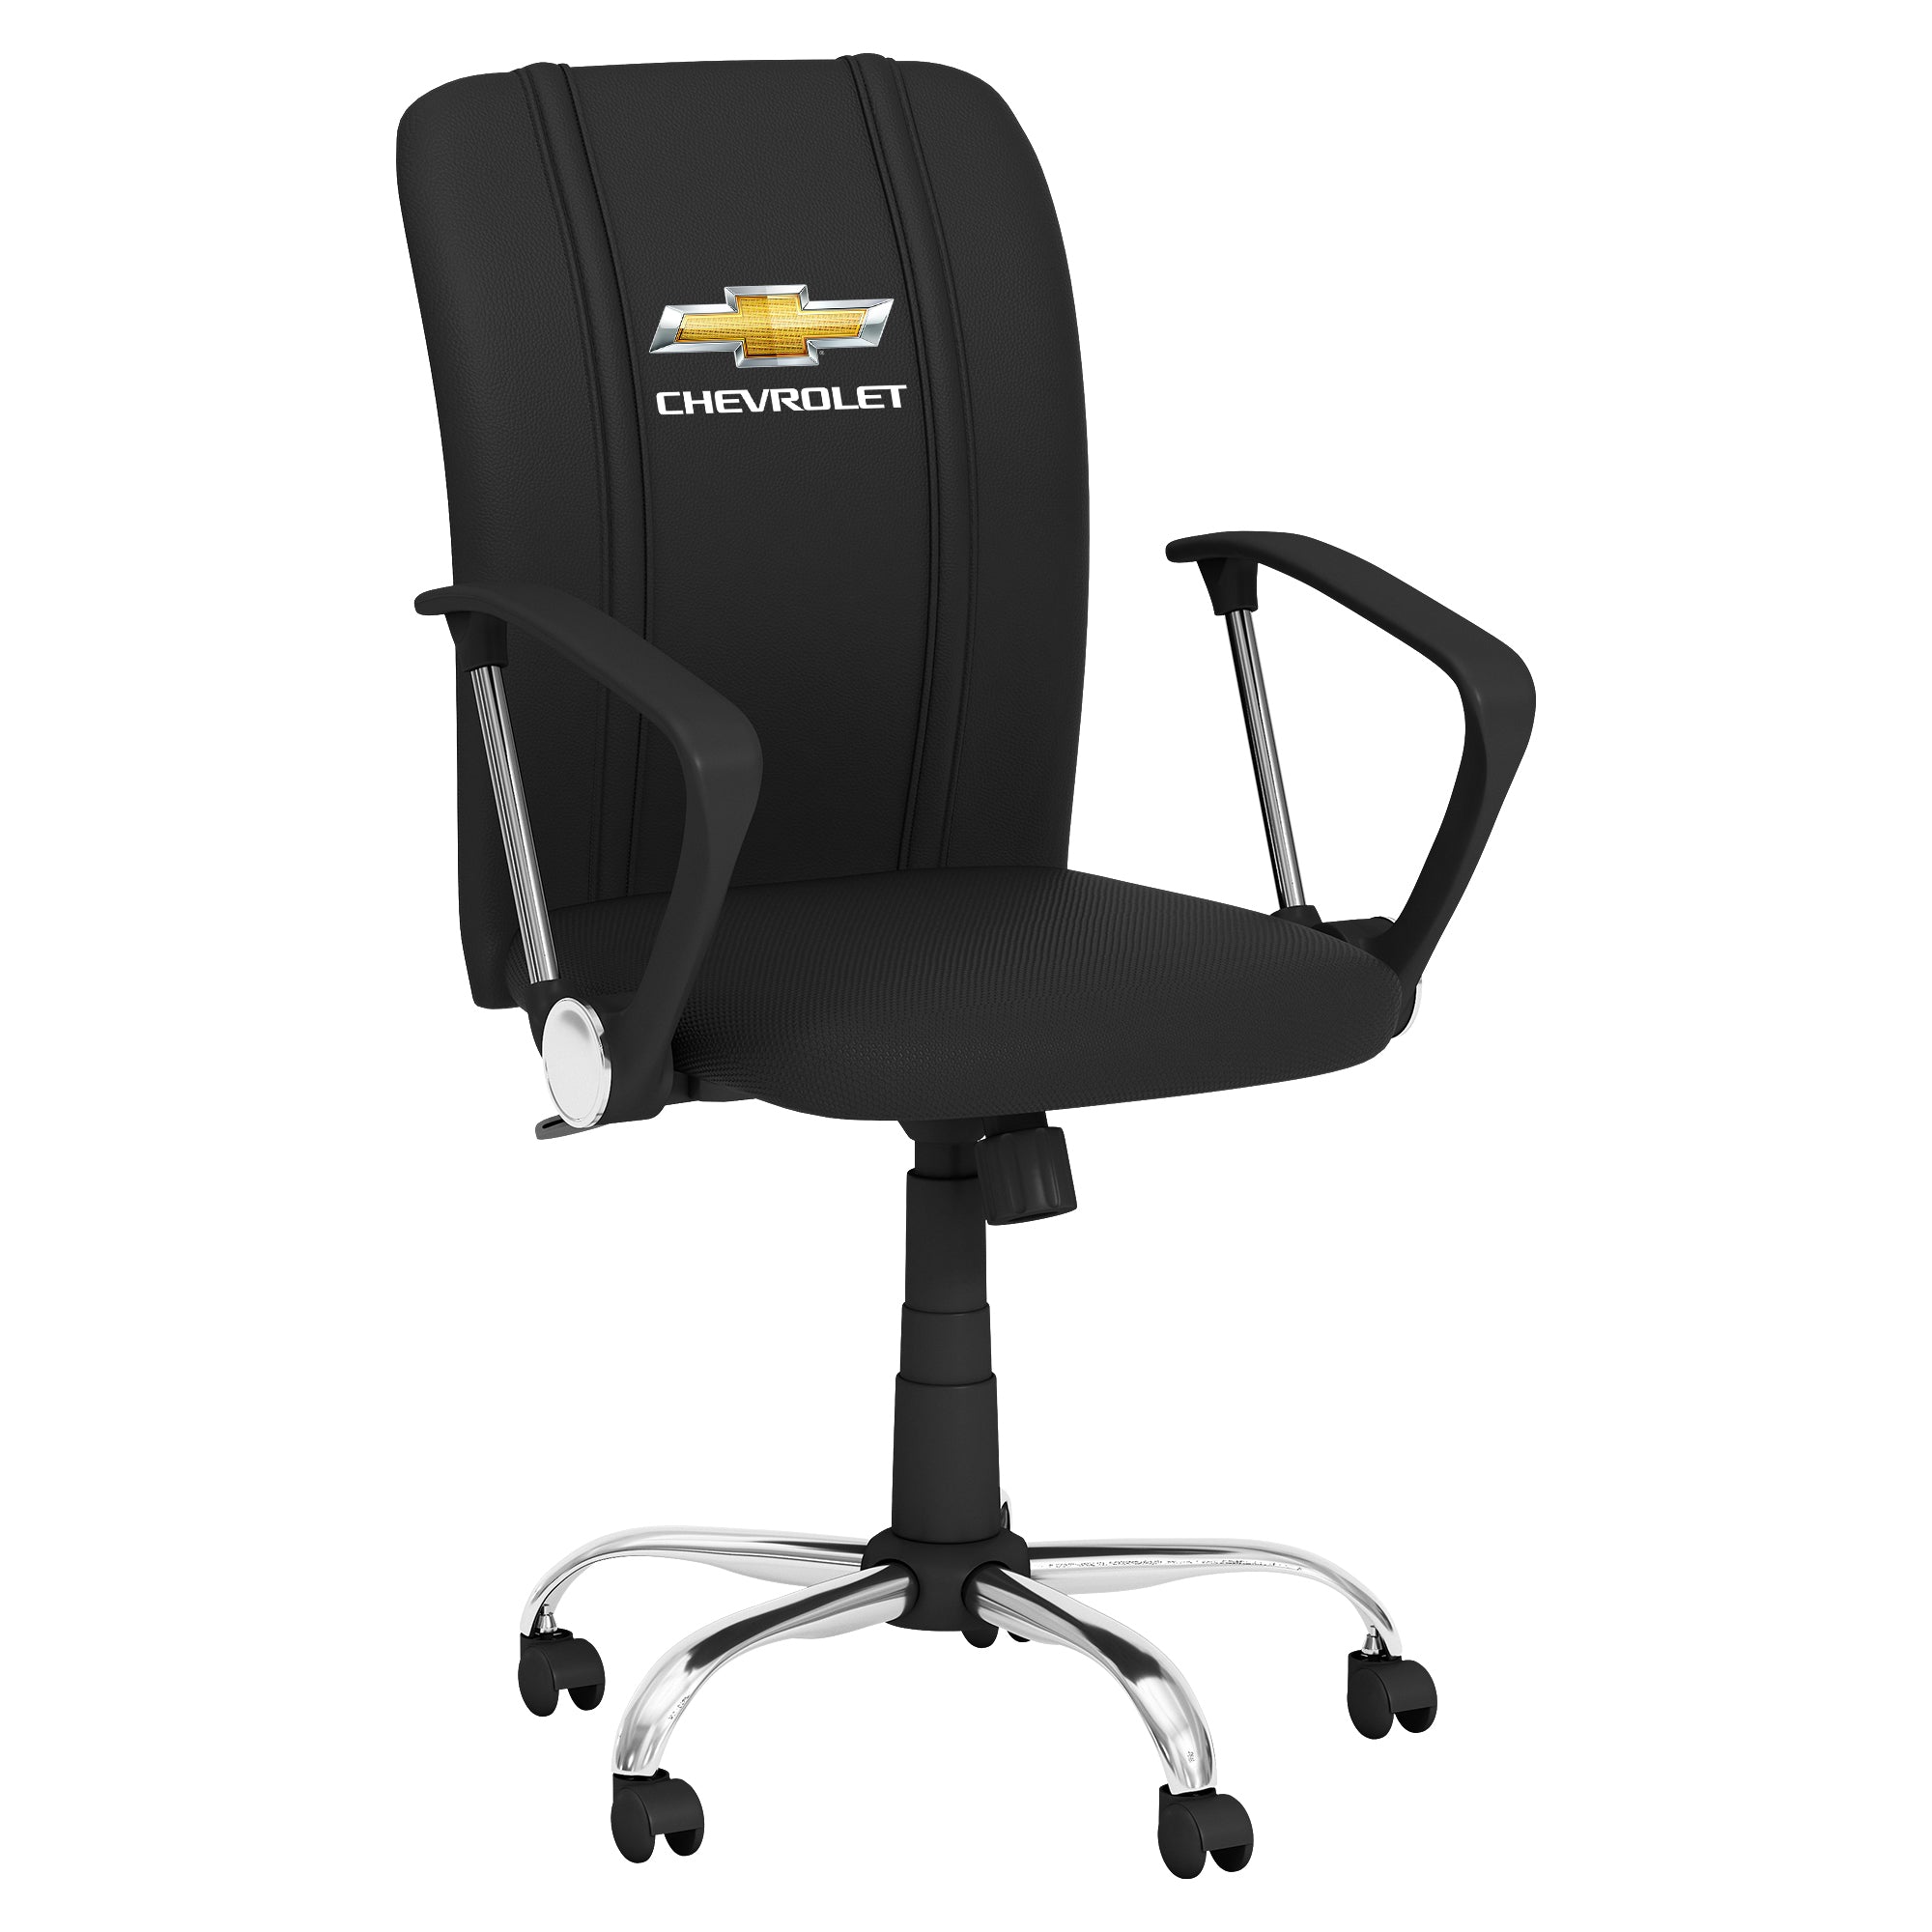 Curve Task Chair with Chevrolet Primary Logo – Zipchair